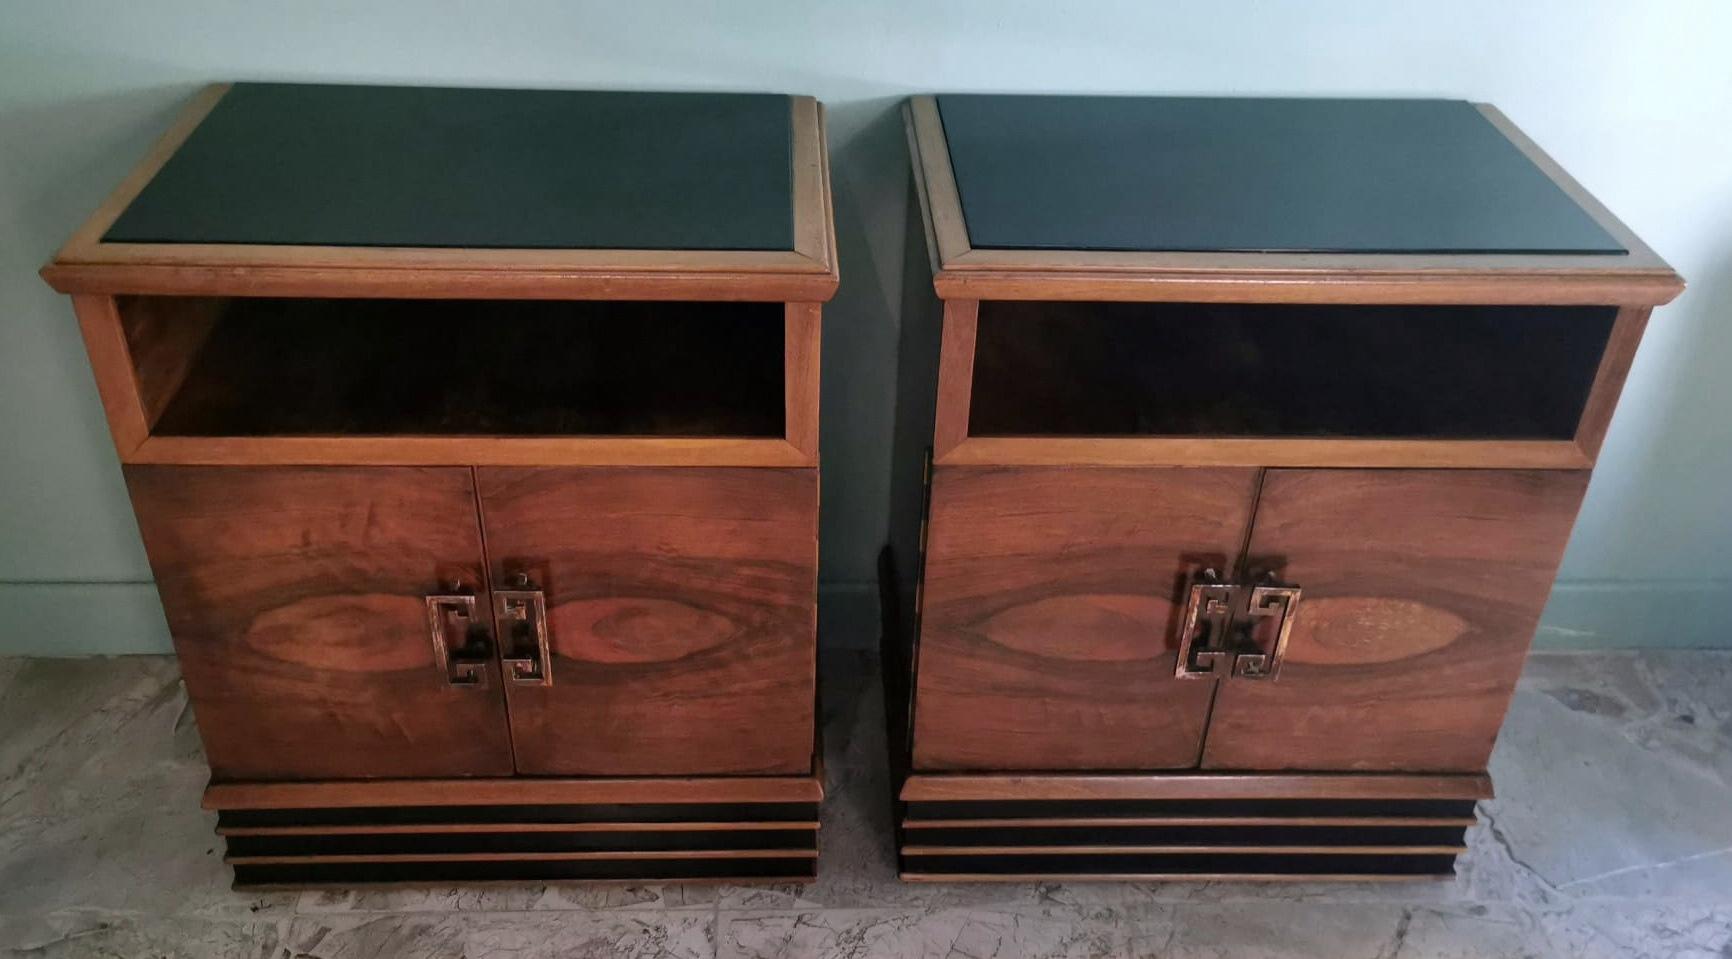 We kindly suggest that you read the whole description, as with it we try to give you detailed technical and historical information to guarantee the authenticity of our objects.
Peculiar and interesting pair of Italian bedside tables in walnut; on